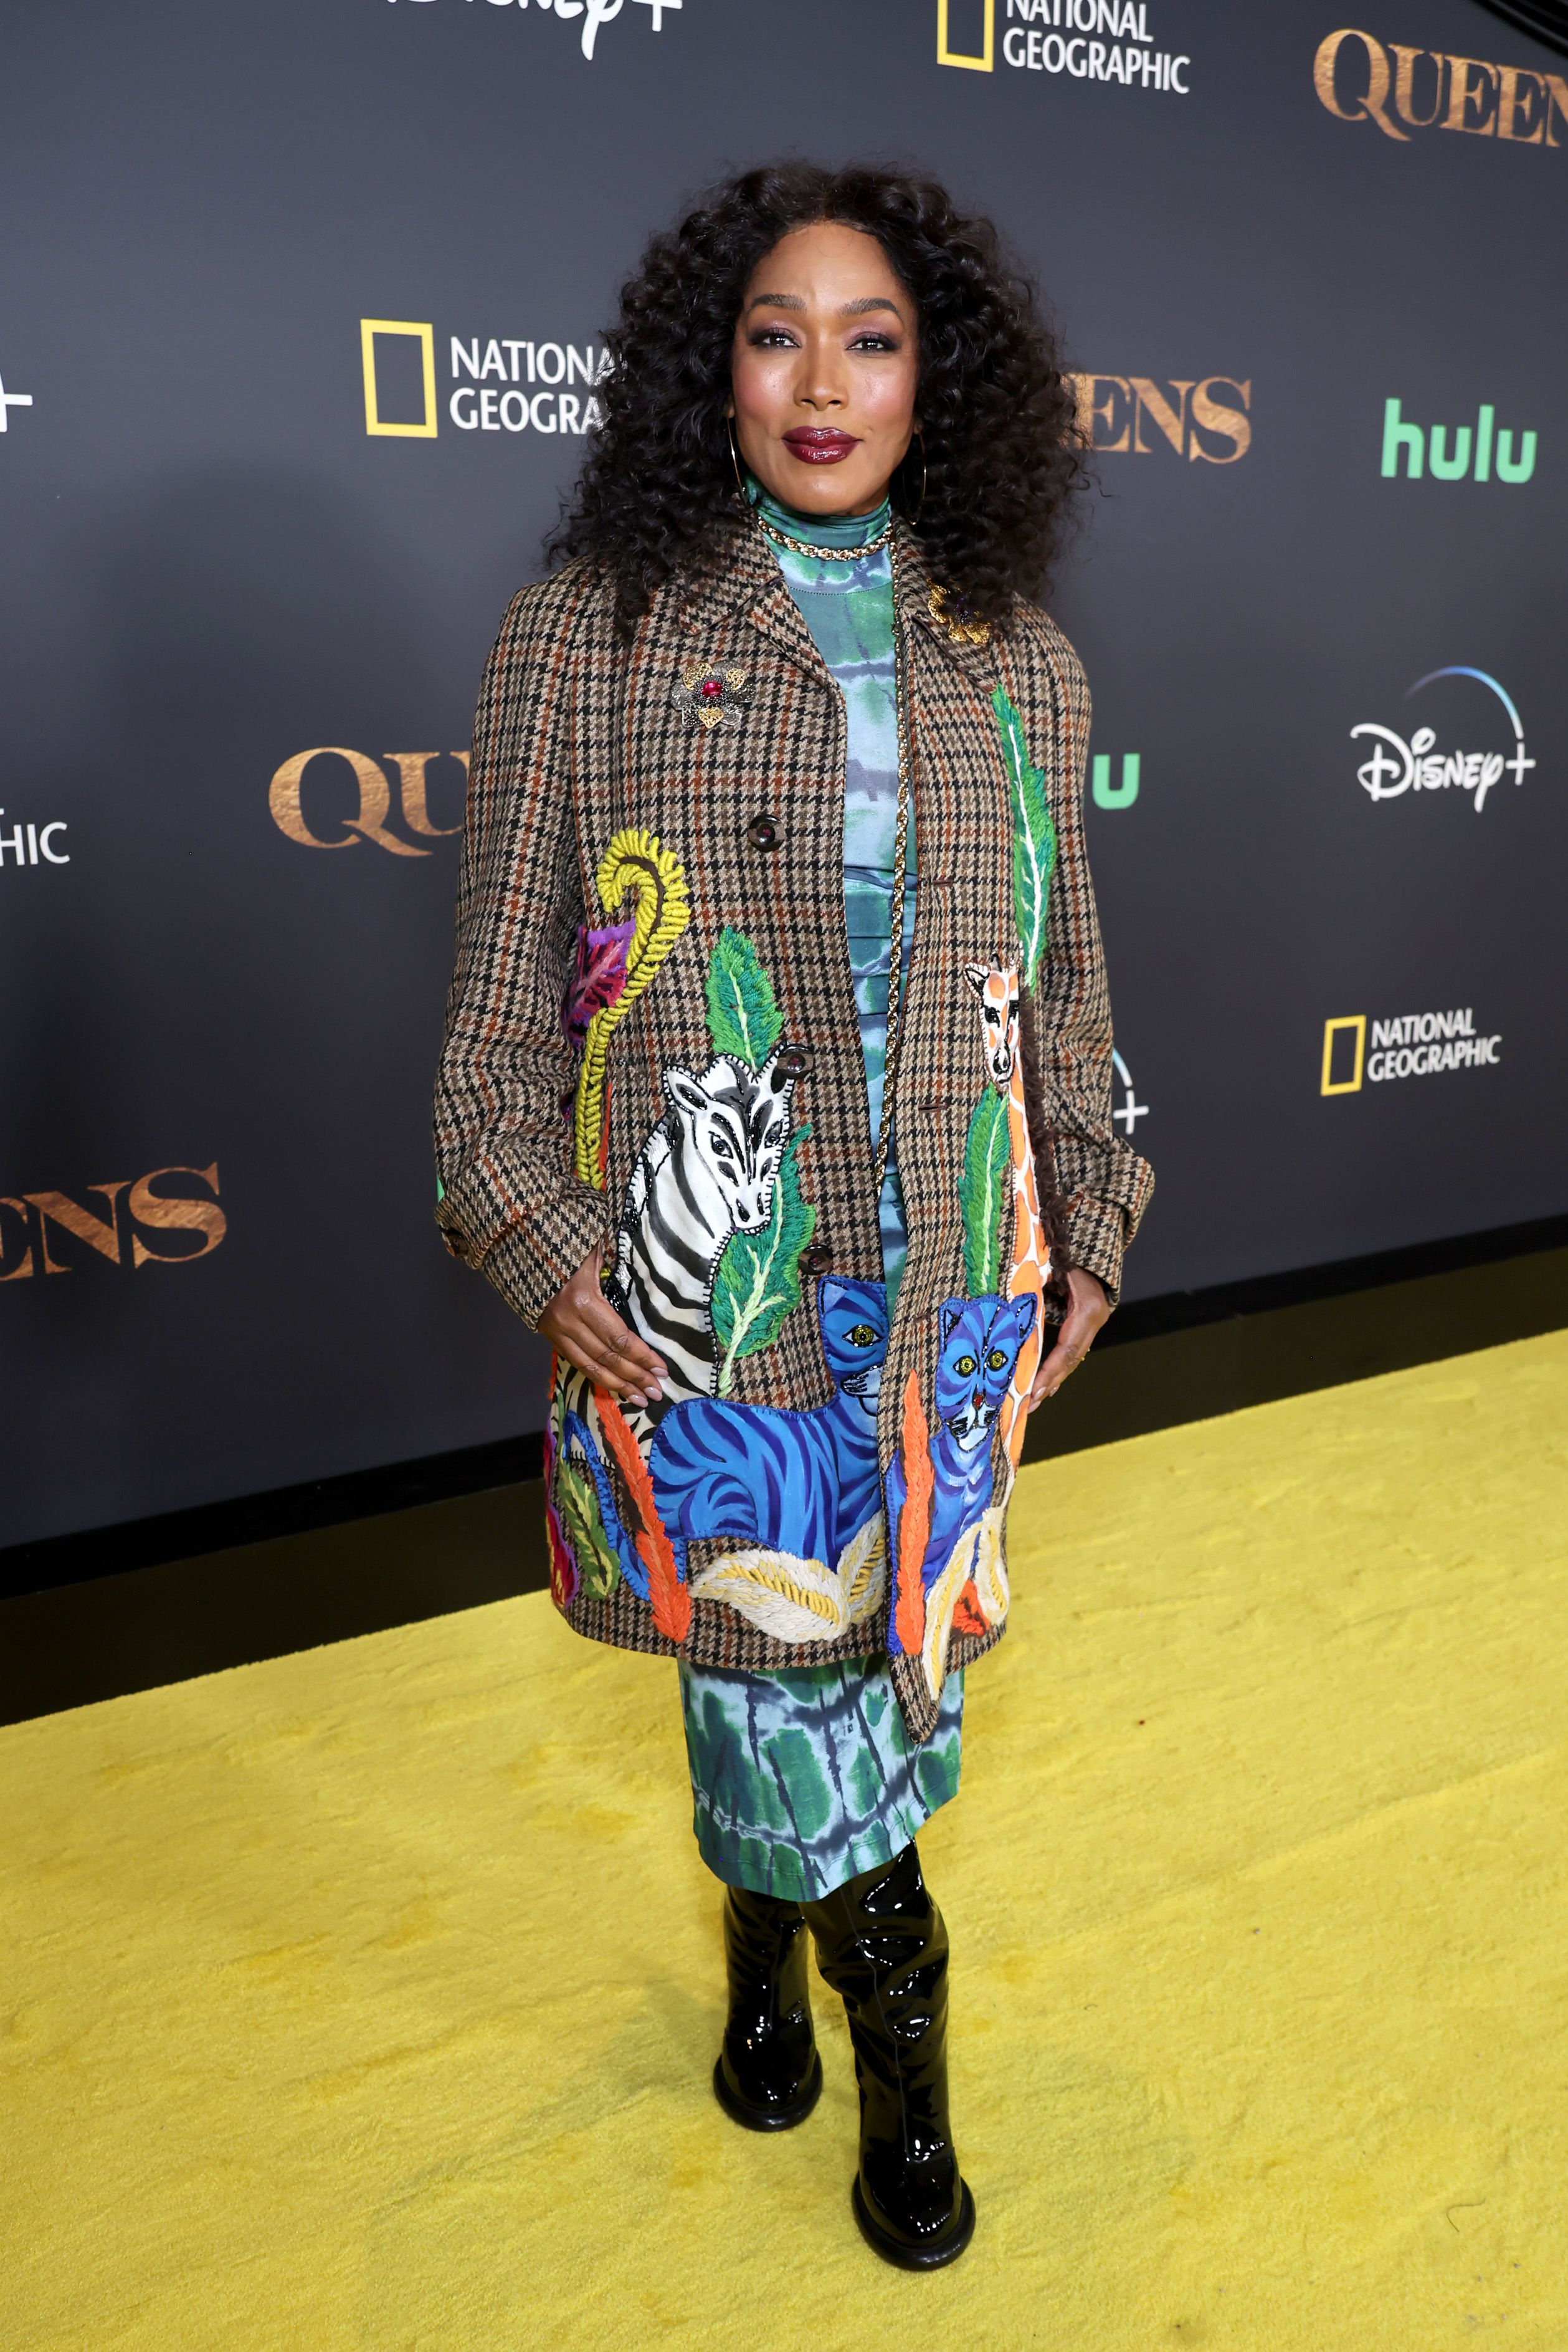 Angela Bassett in a patterned coat and boots at a Queen of Queens event